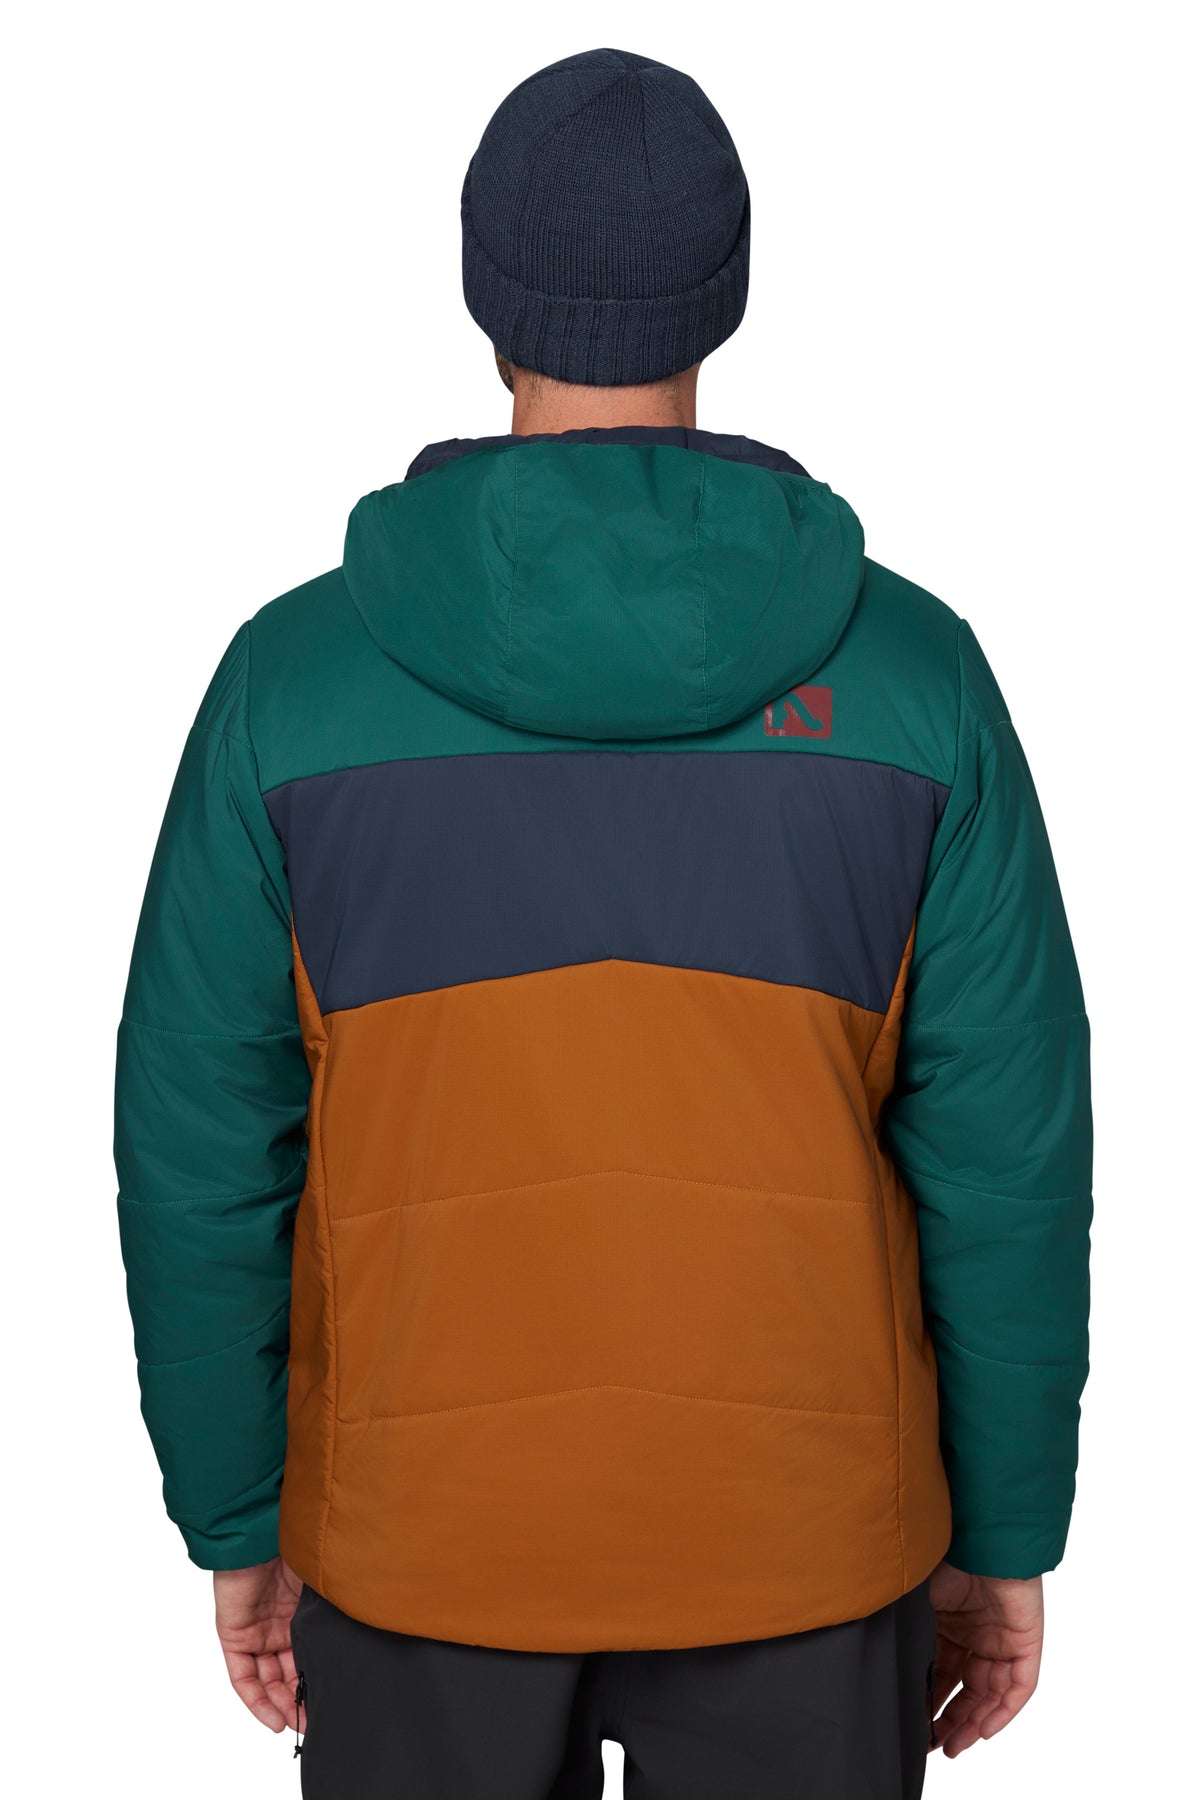 Bear Jacket - Men's Hooded Synthetic Mid Layer